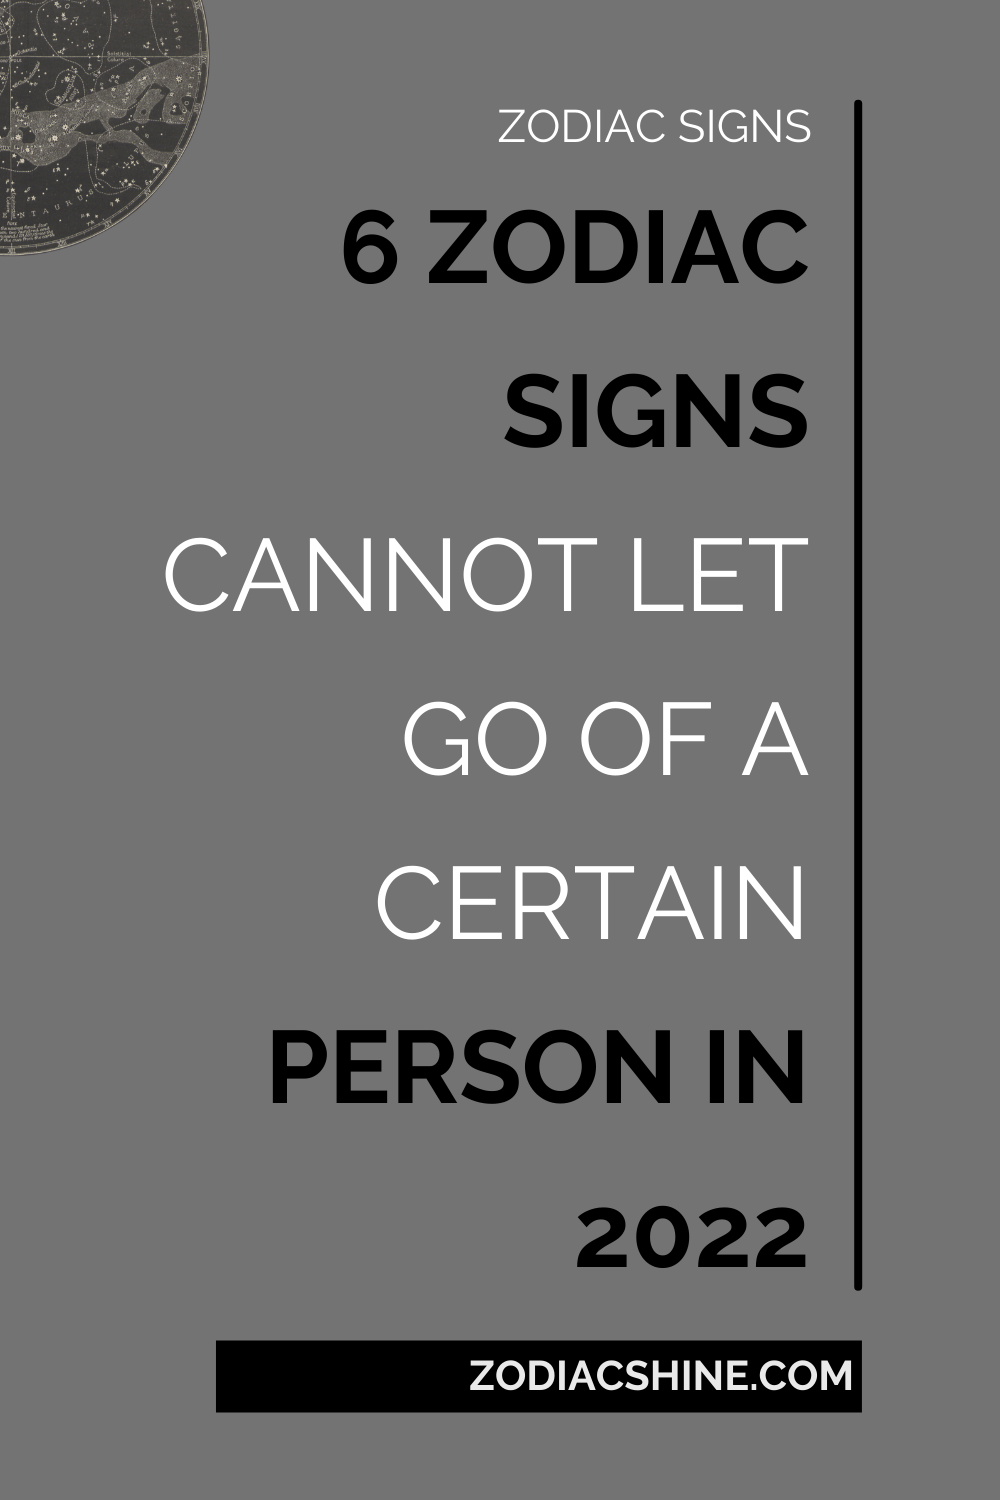 6 Zodiac Signs Cannot Let Go Of A Certain Person In 2022